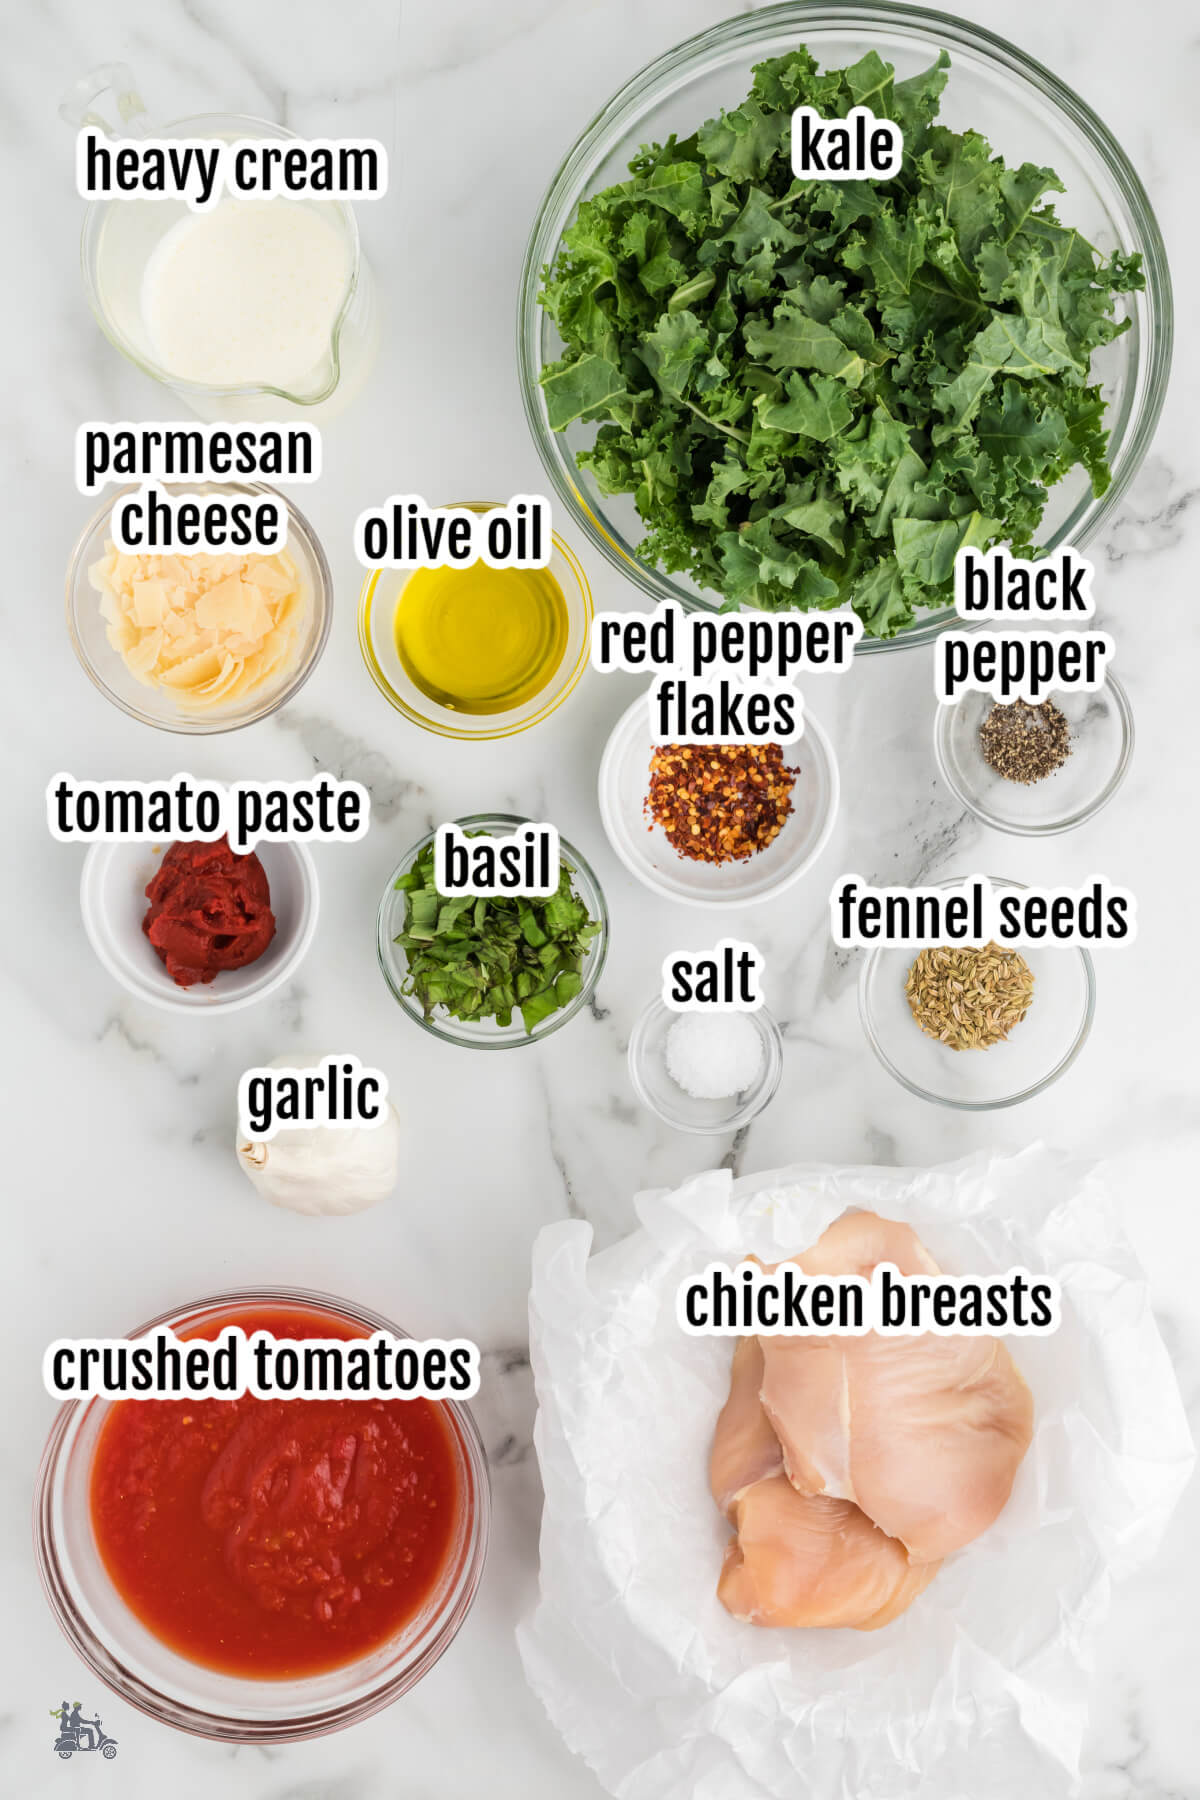 Image of the ingredients needed to make the Tuscan Chicken with creamy tomato sauce.